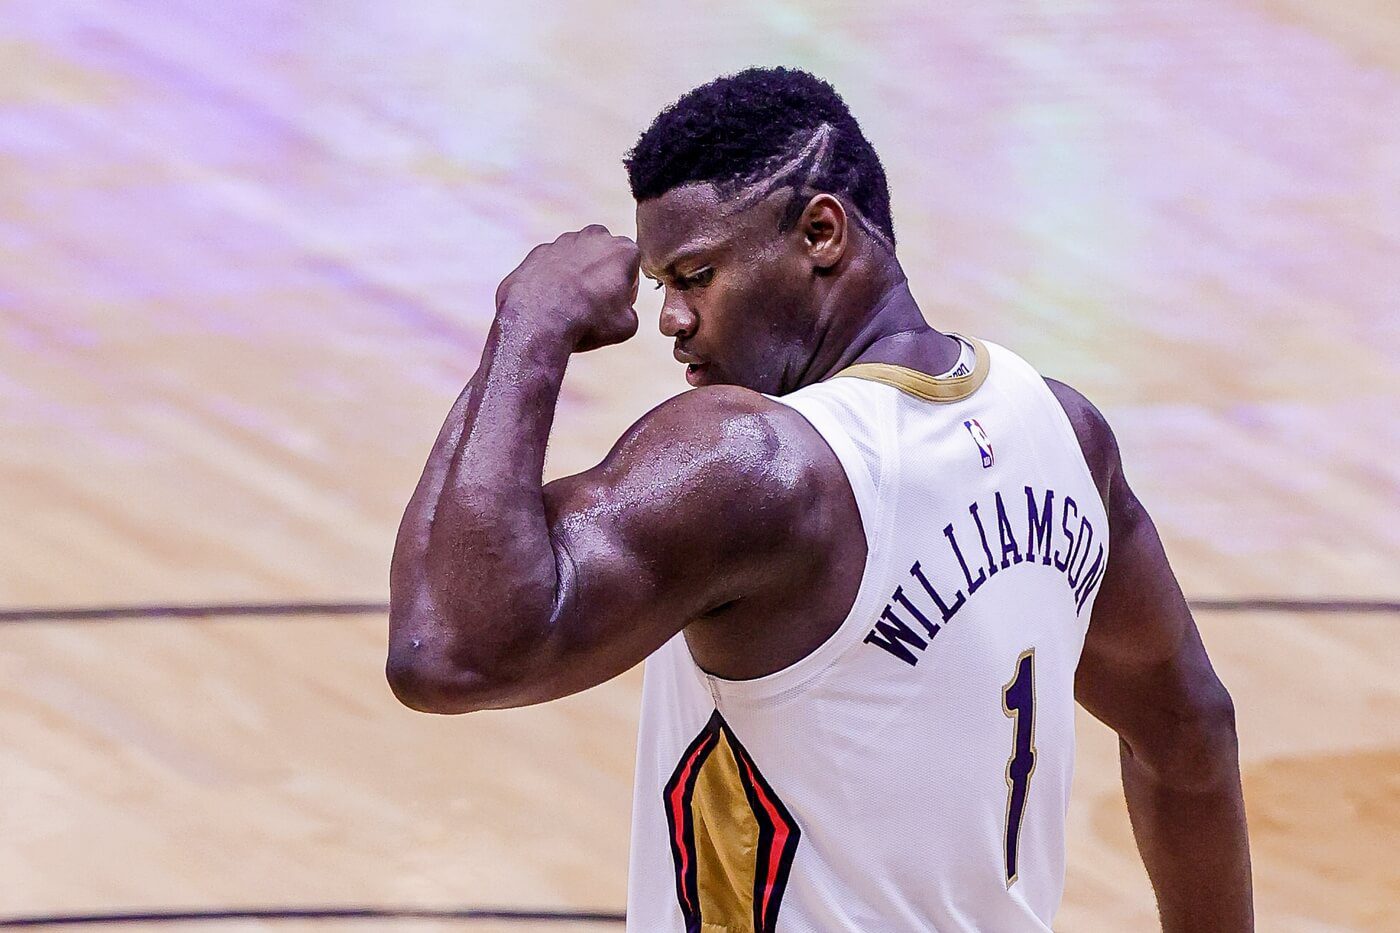 May 3, 2021; New Orleans, Louisiana, USA; New Orleans Pelicans forward Zion Williamson (1) flexes his muscle after making a basket against Golden State Warriors forward Draymond Green (23) during the second half at the Smoothie King Center. Mandatory Credit: Stephen Lew-USA TODAY Sports